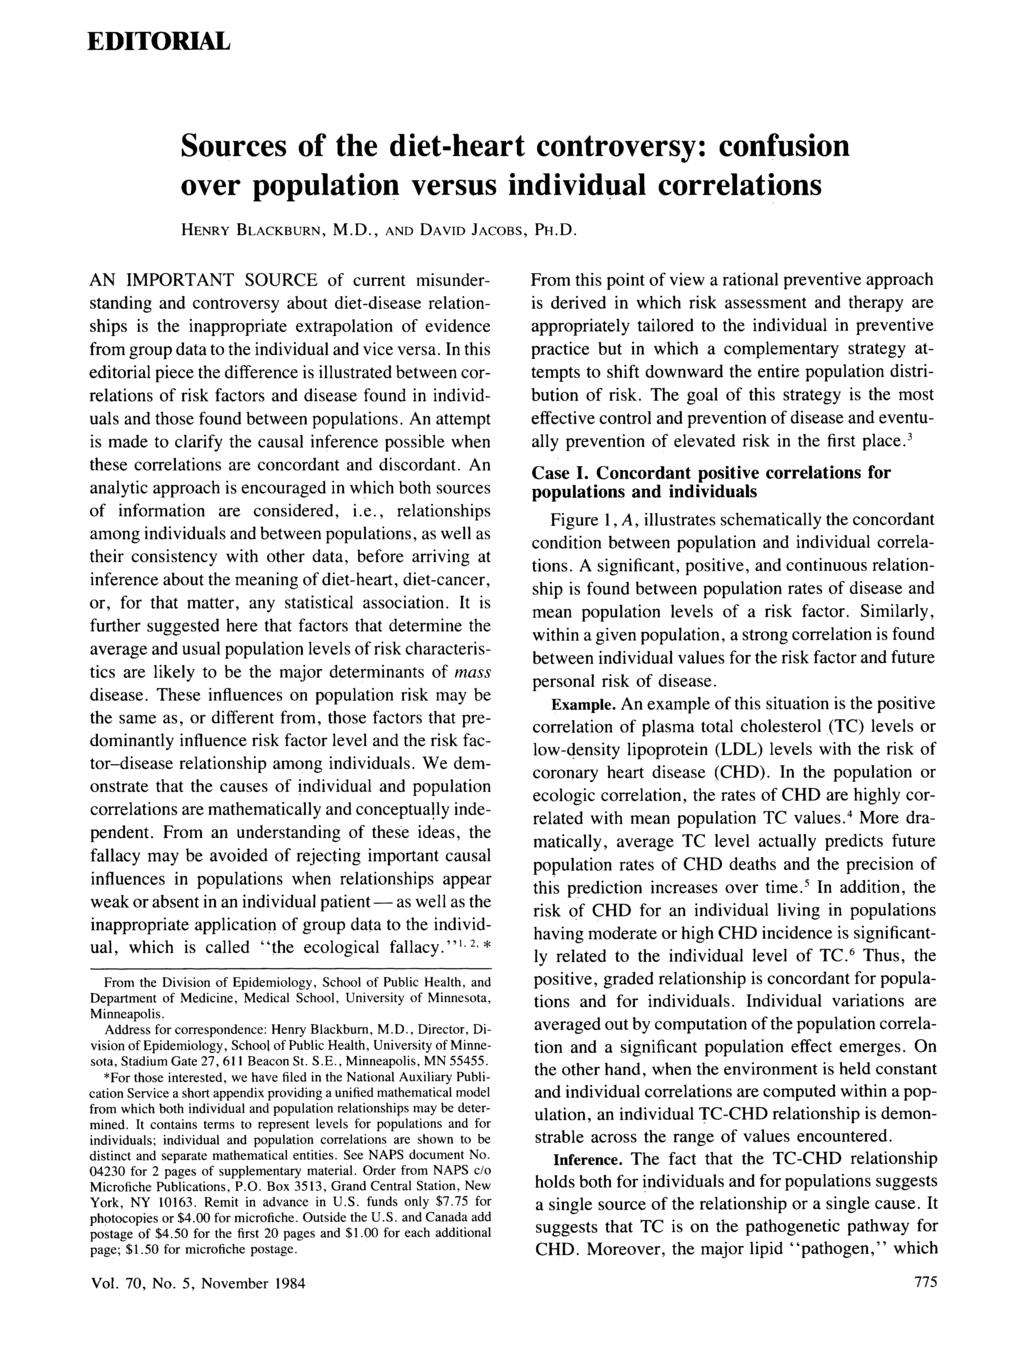 EDITORIAL Sources of the diet-heart controversy: confusion over population versus individual correlations HENRY BLACKBURN, M.D., AND DAVID JACOBS, PH.D. AN IMPORTANT SOURCE of current misunderstanding and controversy about diet-disease relationships is the inappropriate extrapolation of evidence from group data to the individual and vice versa.